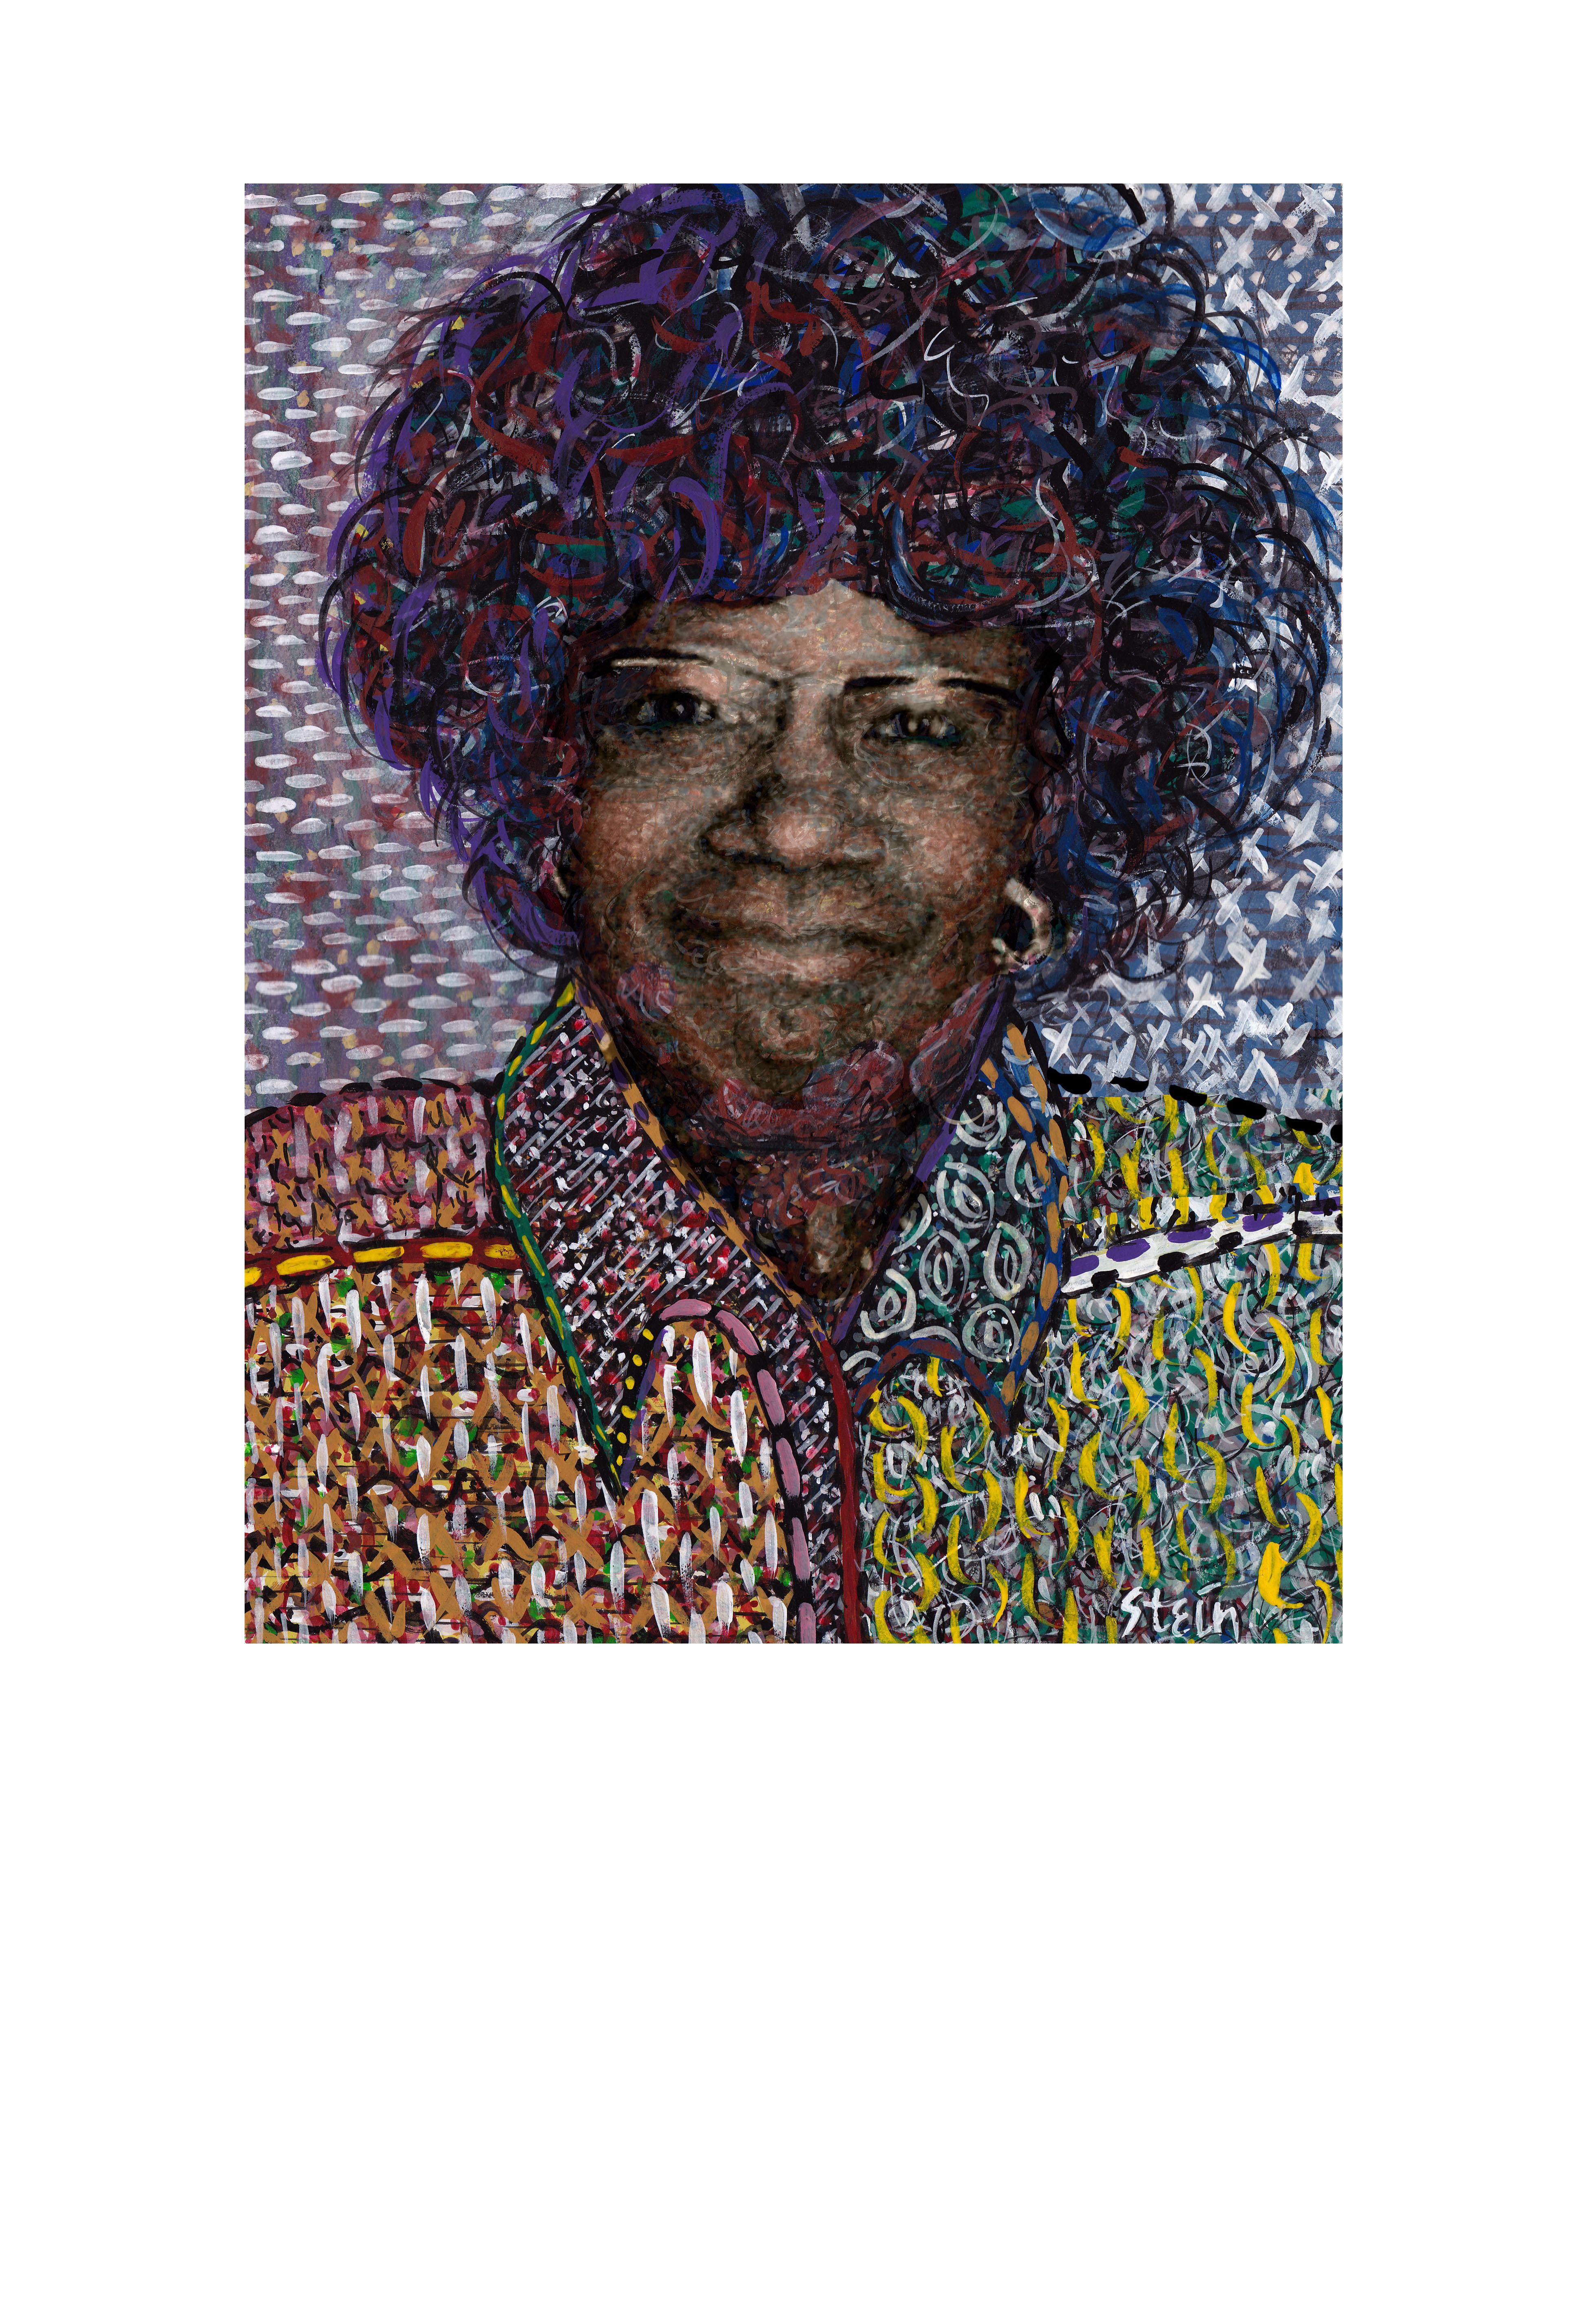 Signed Limited Edition Feminist Contemporary Art Print - Shirley Chisholm 763